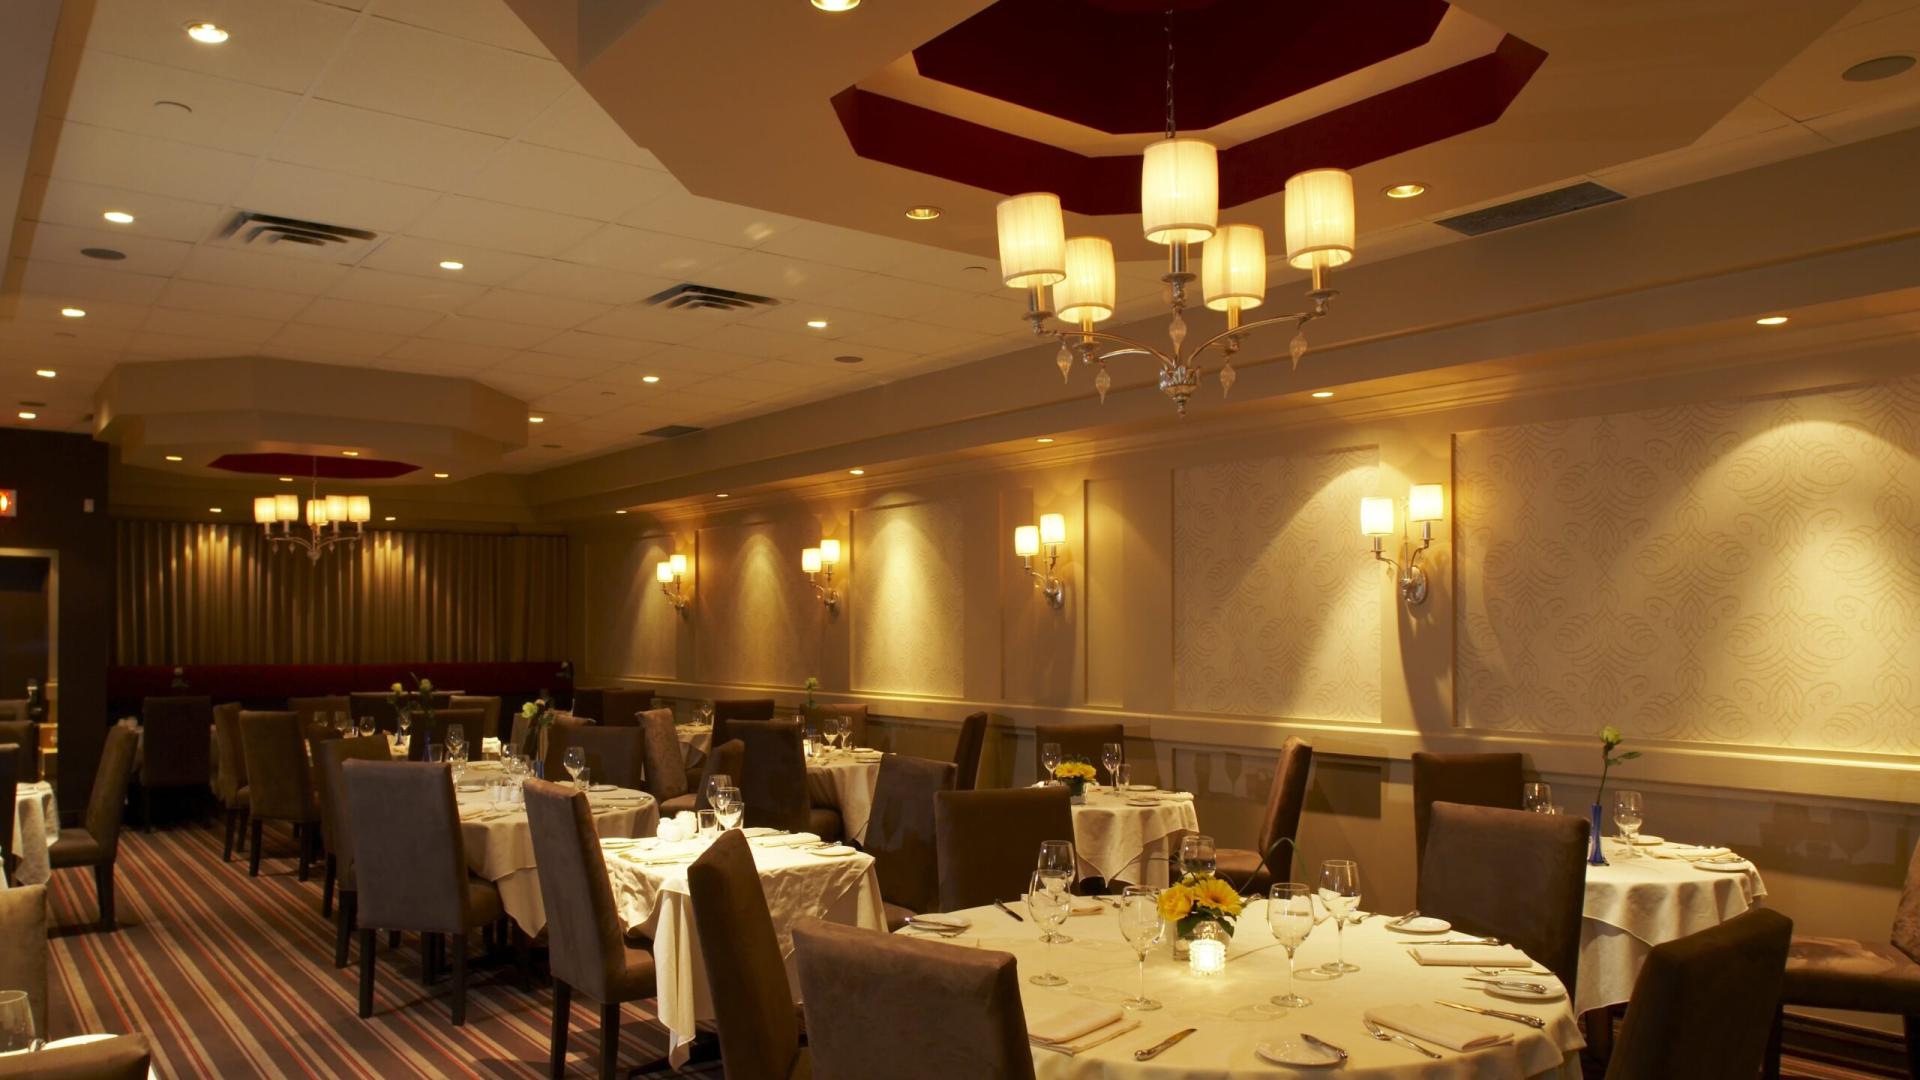 Christening Party Venues for Rent in Toronto, ON